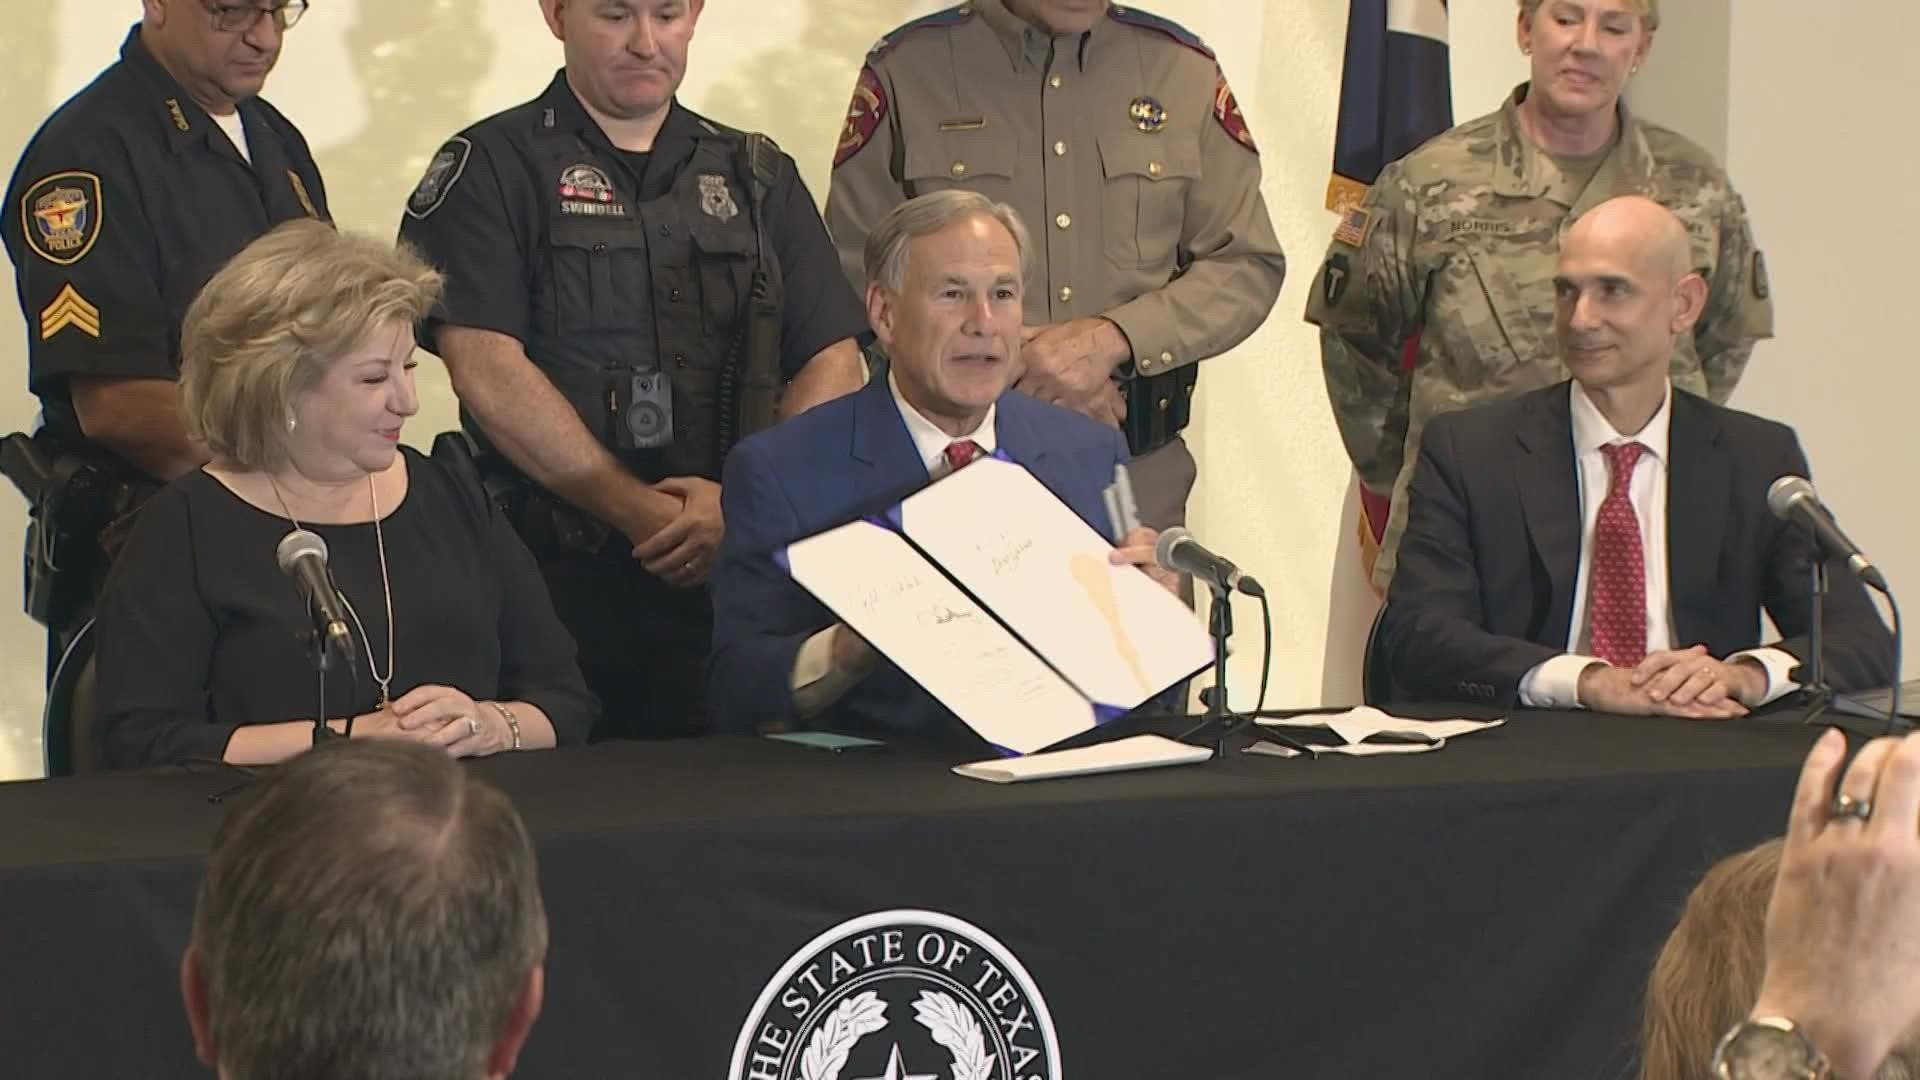 The humanitarian crisis is taking place as Gov. Greg Abbott signed a new law in Fort Worth on border security.